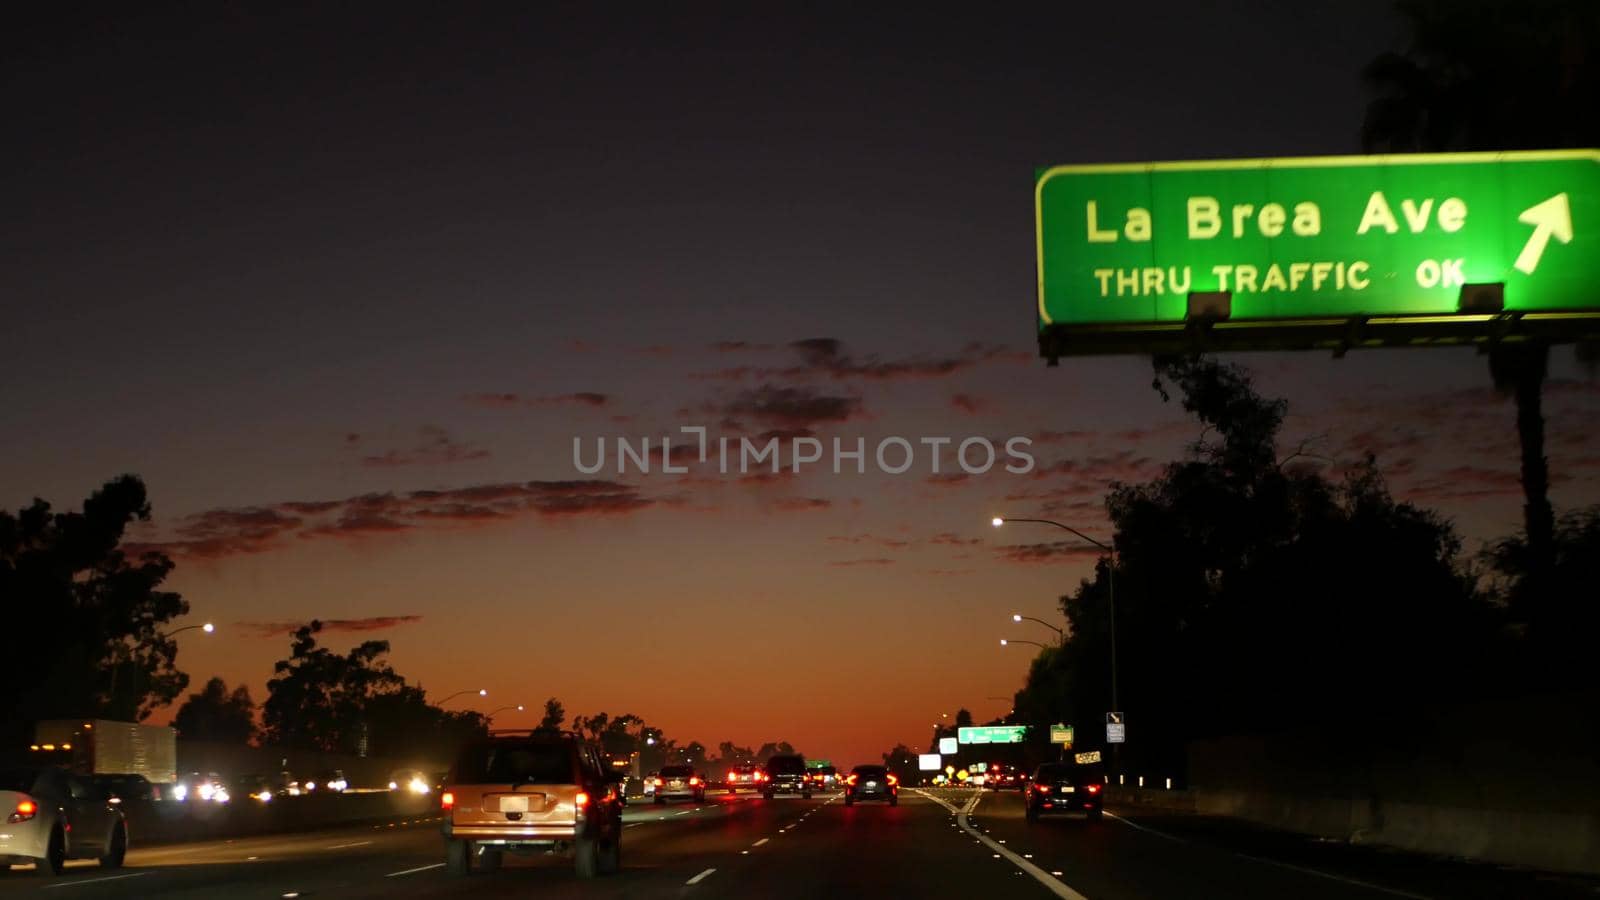 View from the car. Los Angeles busy freeway at night time. Massive Interstate Highway Road in California, USA. Auto driving fast on Expressway lanes. Traffic jam and urban transportation concept. by DogoraSun